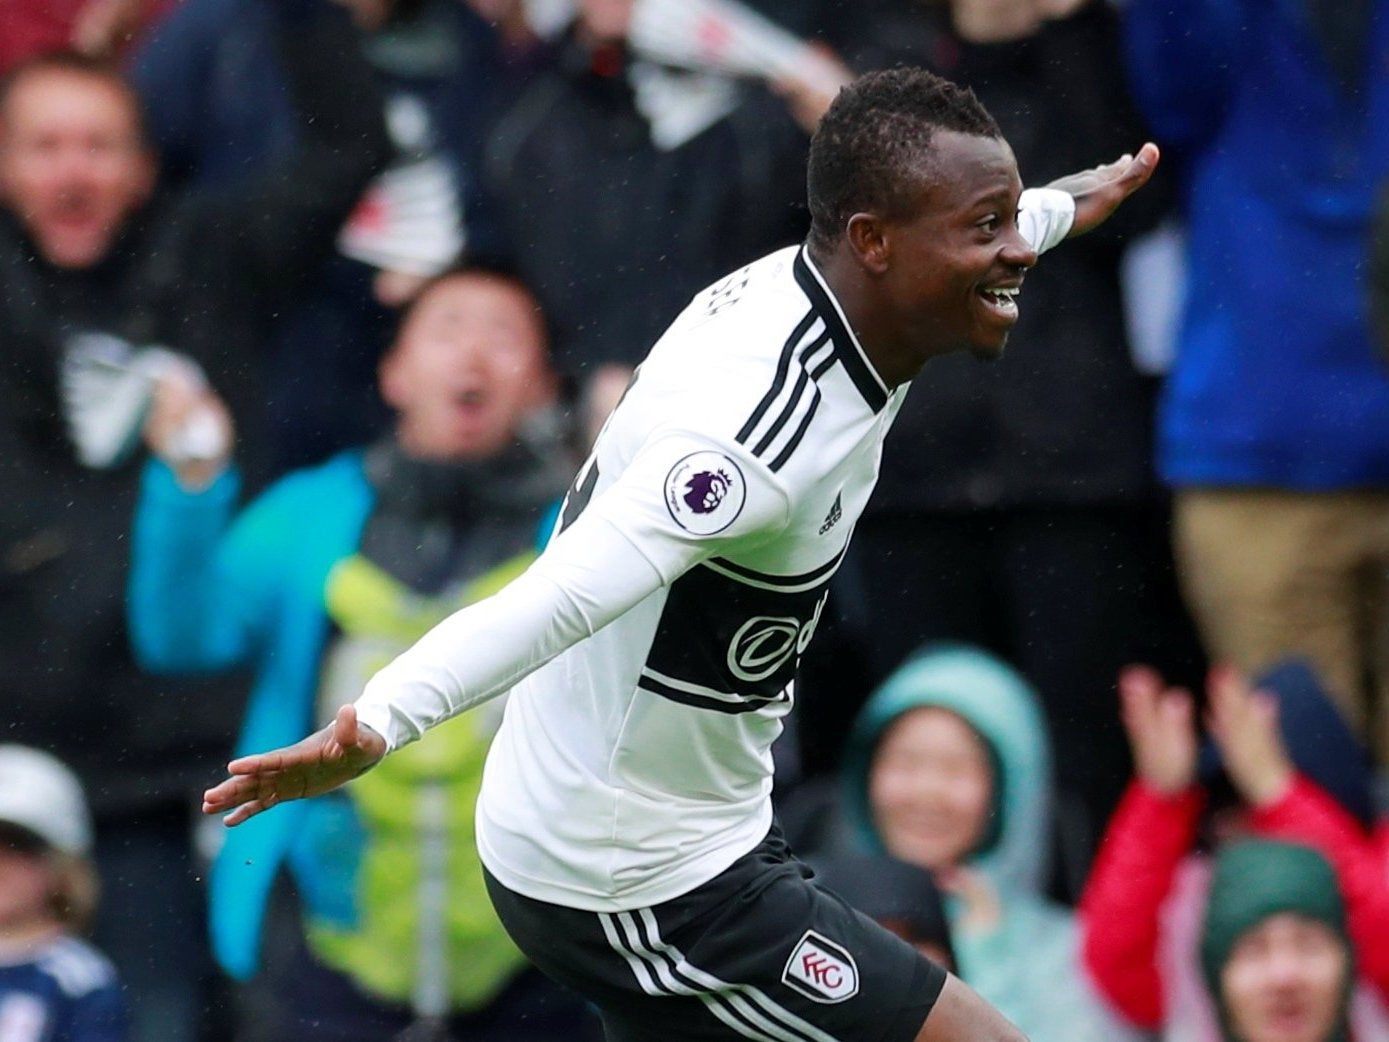 Fulham's Jean Michael Seri joined the club in the summer (Reuters)